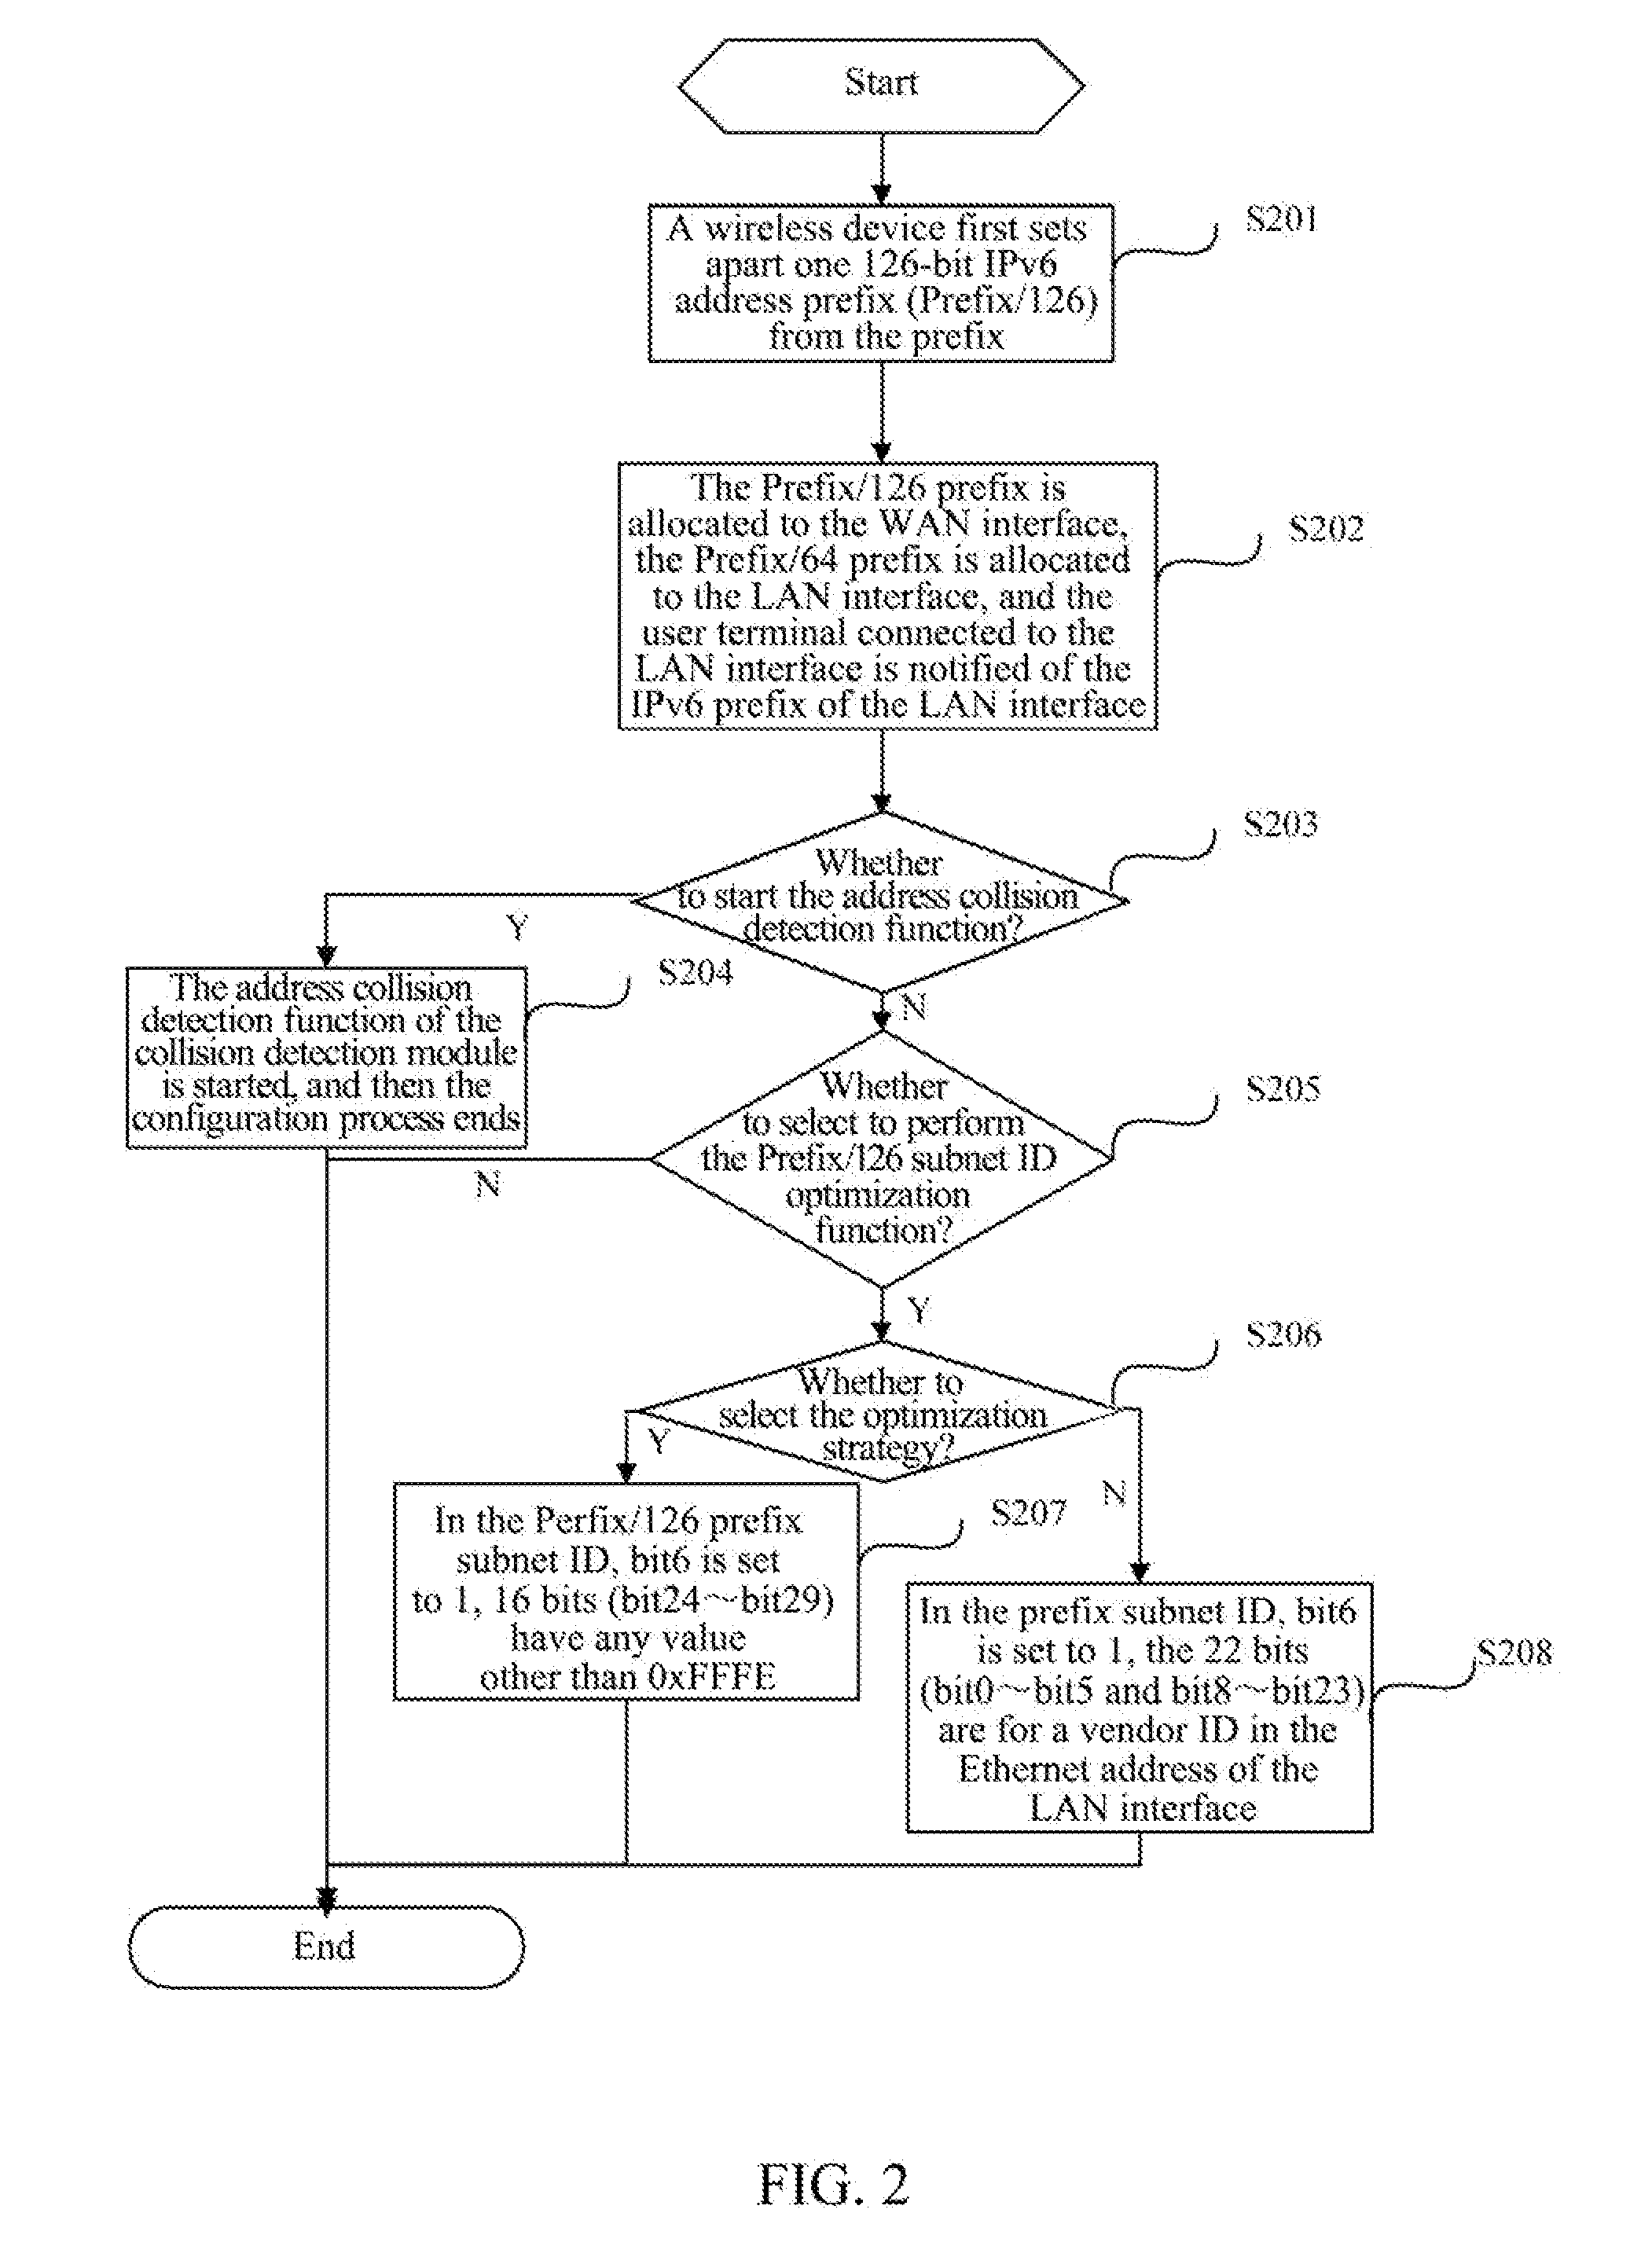 Method for Route Transmission Based on Single IPv6 Address Prefix, and Wireless Device